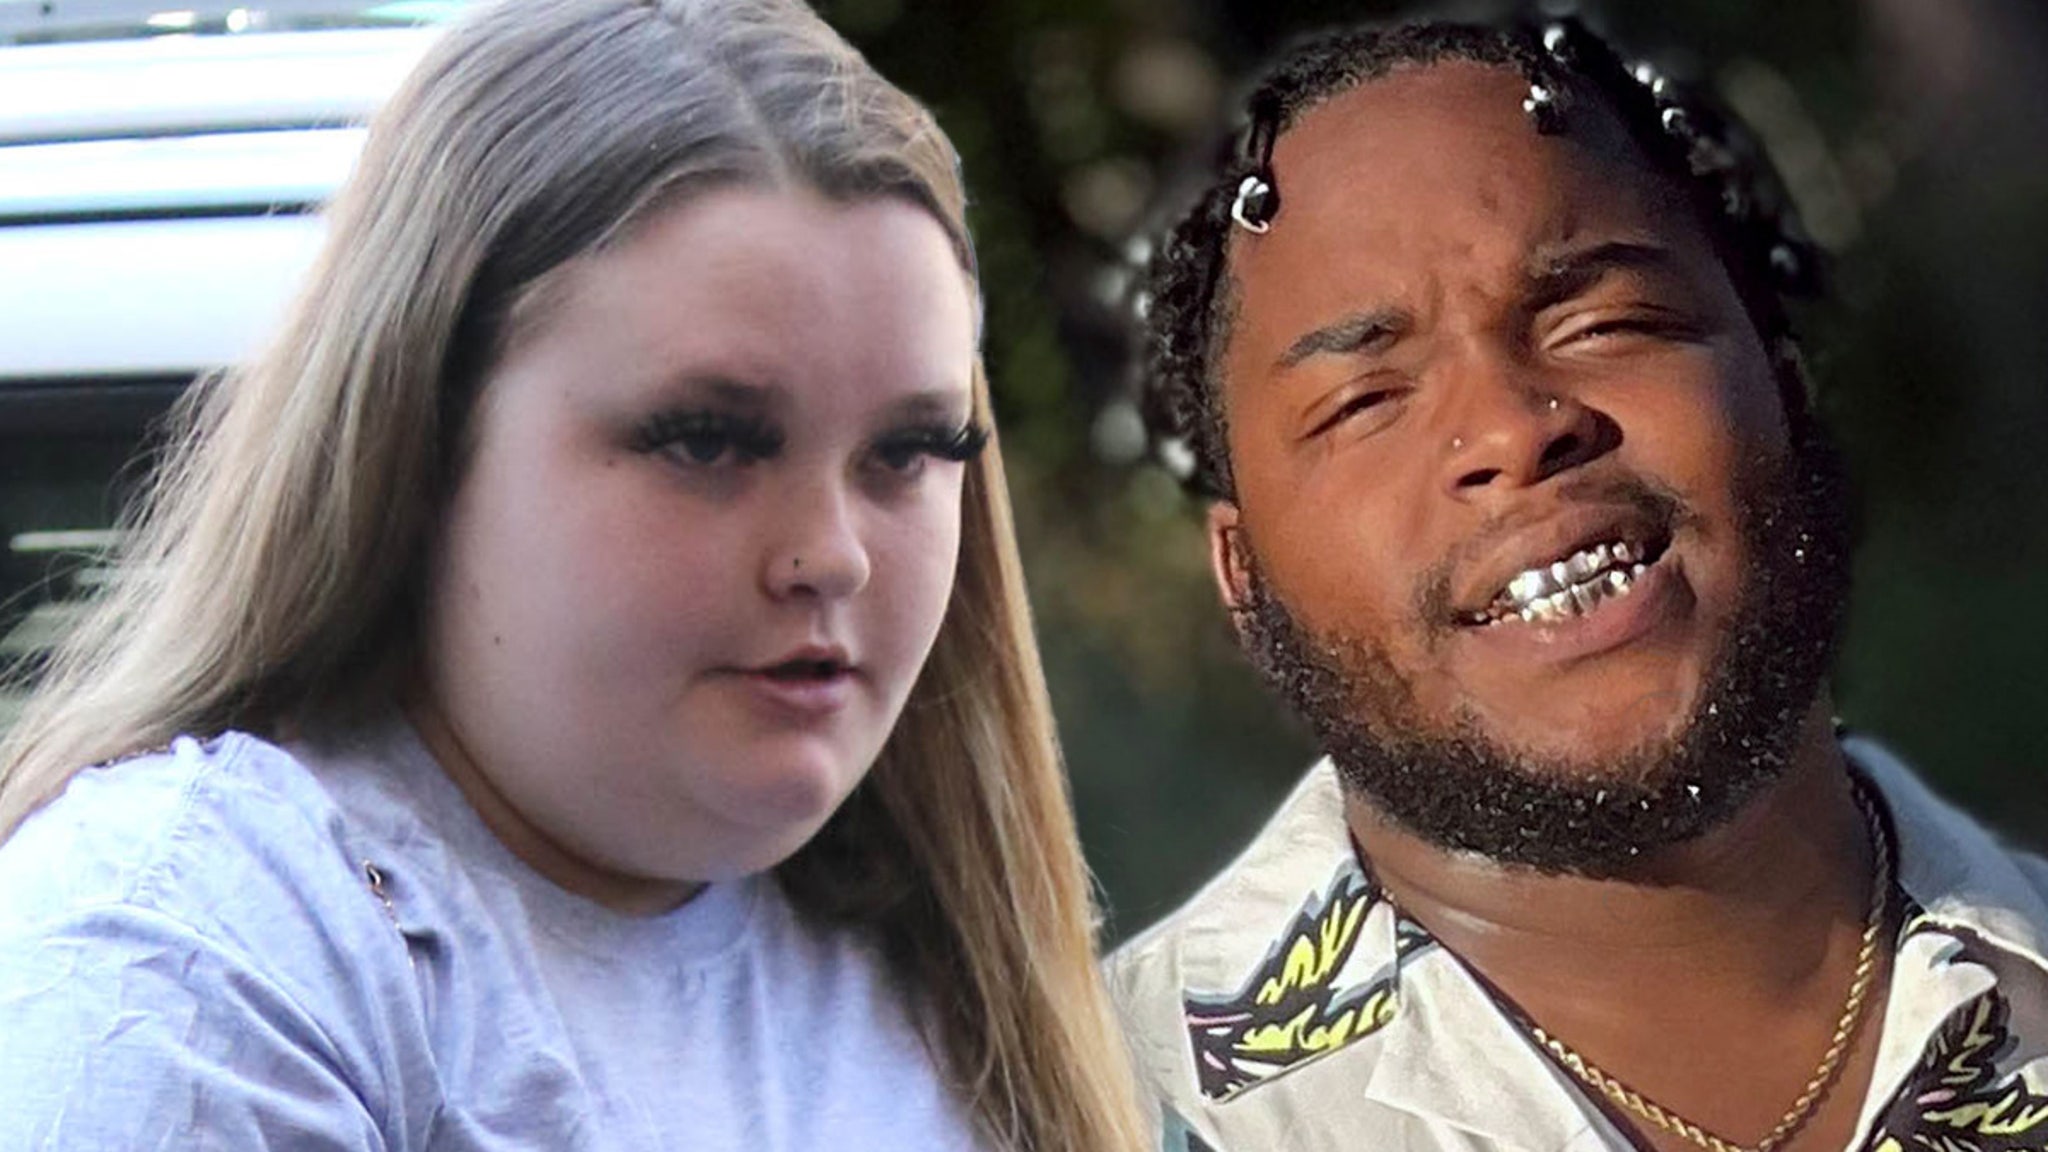 ‘Honey Boo Boo’ Alana Thompson in Vehicle as Boyfriend Arrested For DUI, Fleeing